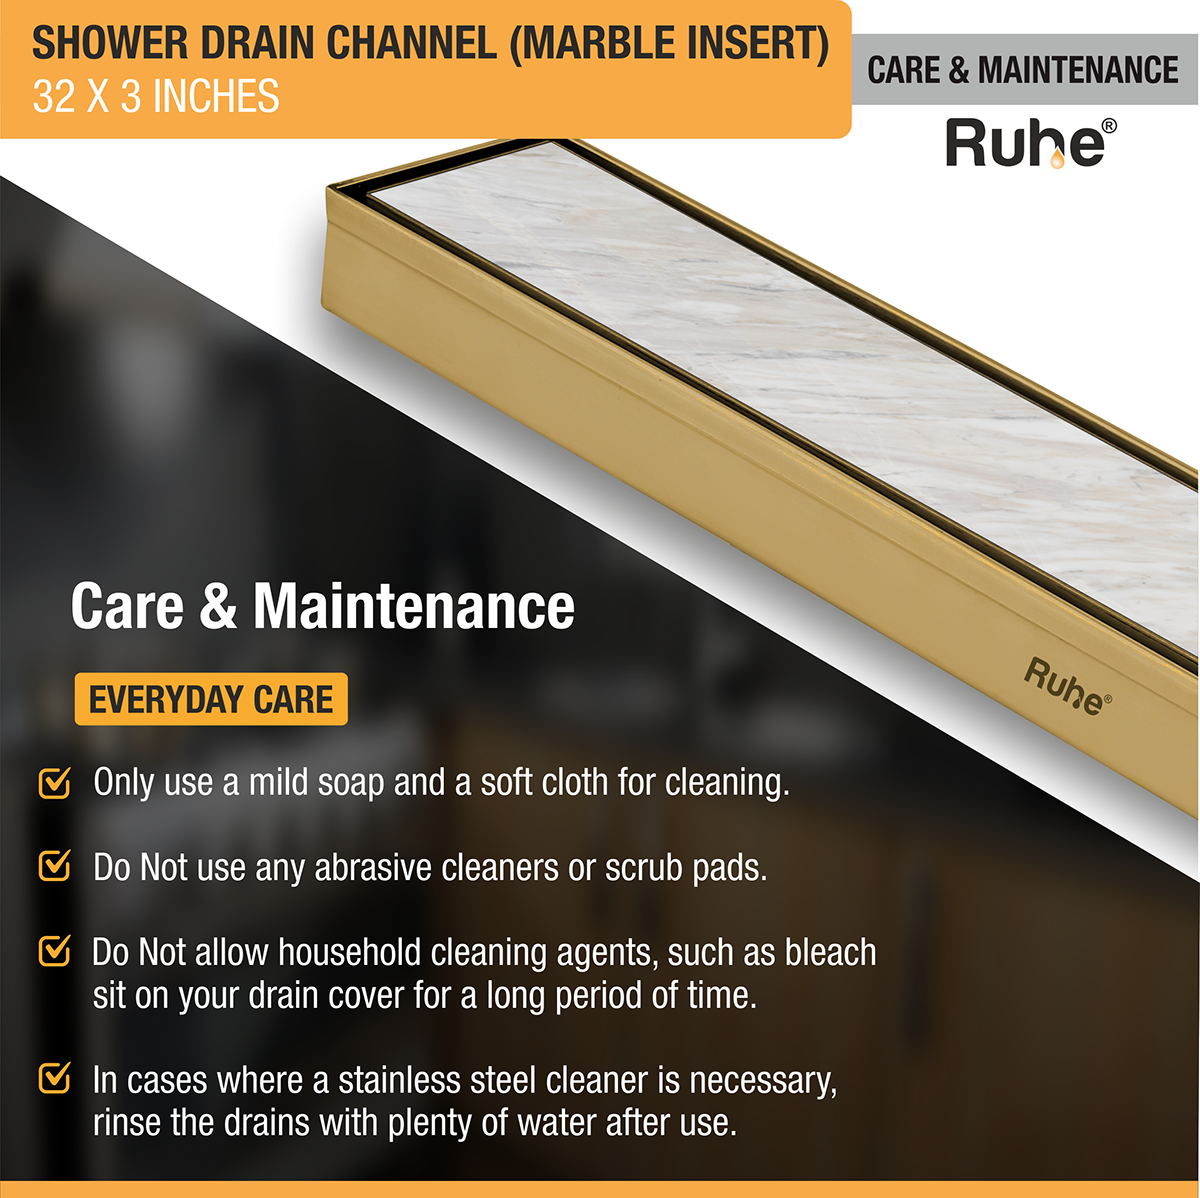 Marble Insert Shower Drain Channel (32 x 3 Inches) YELLOW GOLD PVD Coated care and maintenance